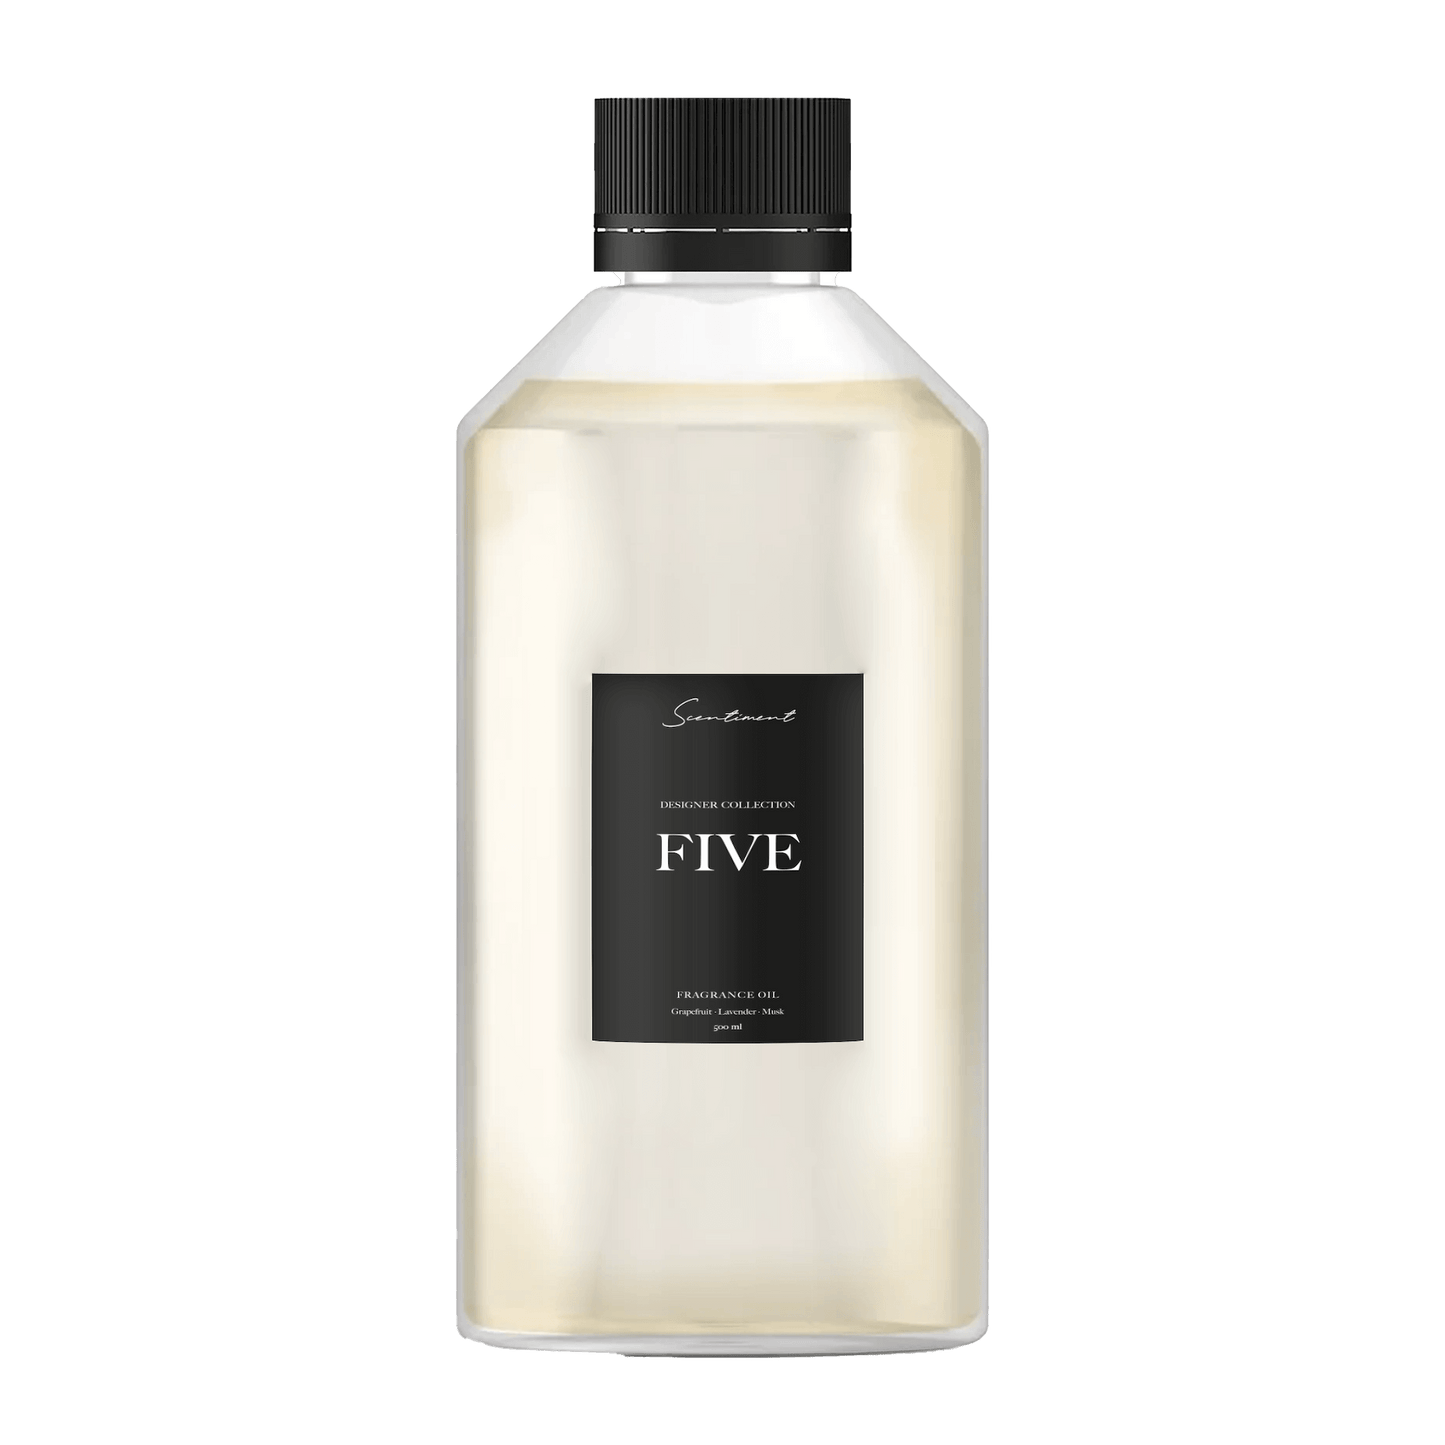 Five, inspired by Chanel No. 5®, with notes of Grapefruit, Lavender, and Musk.